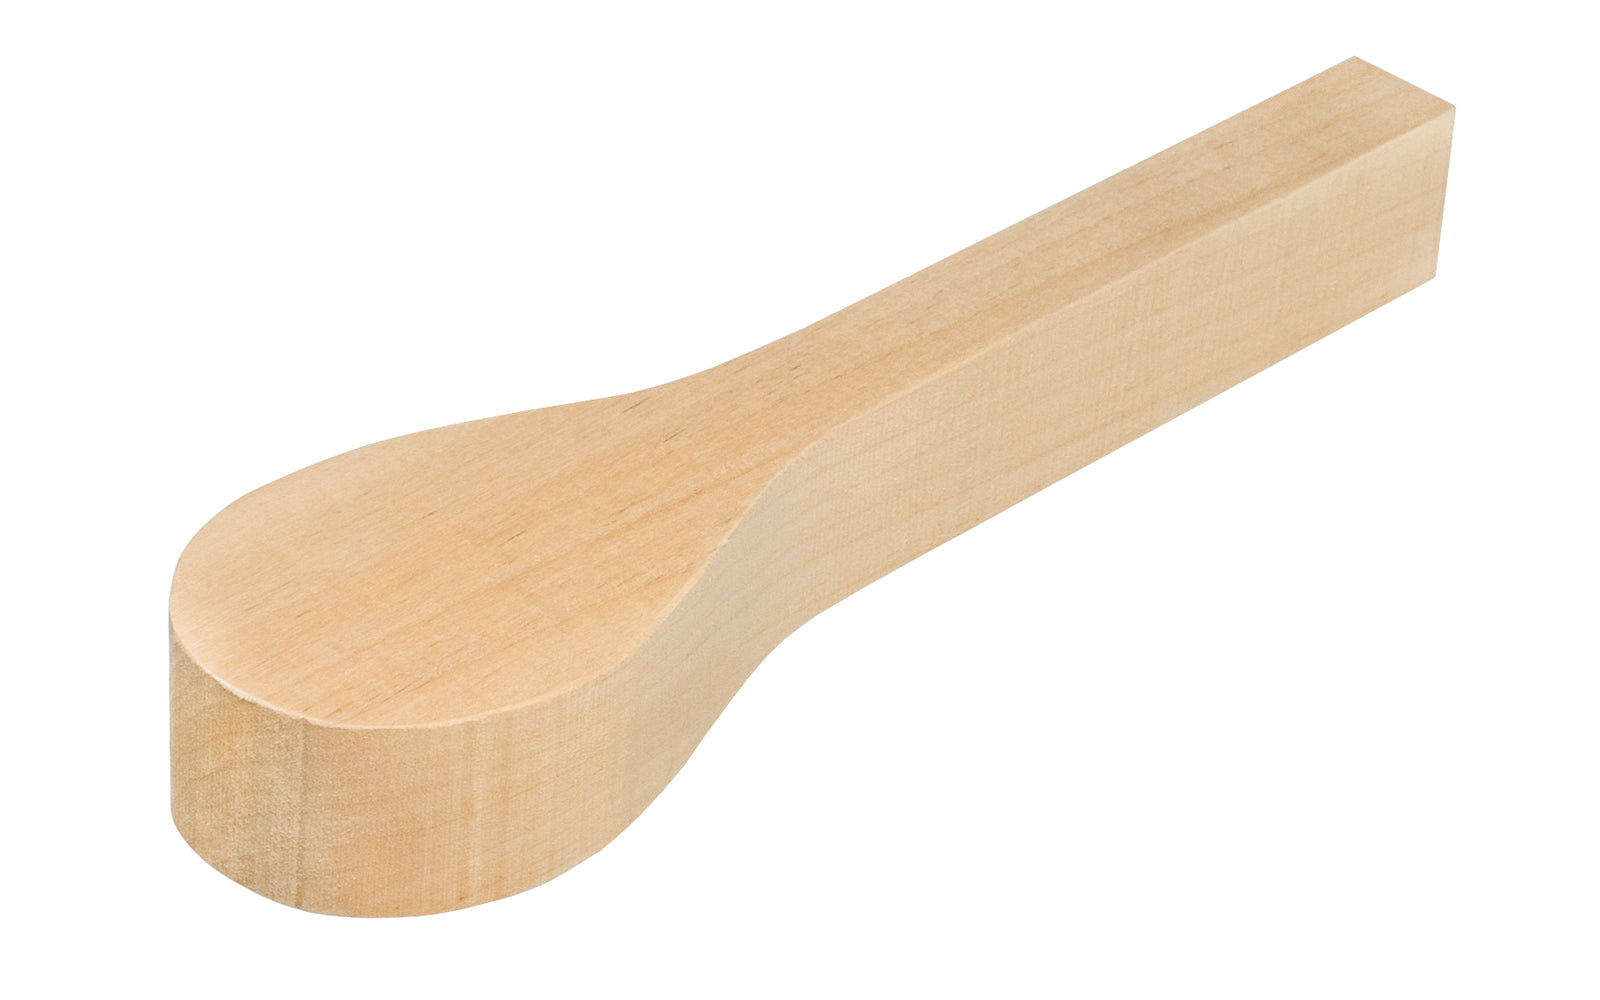 Flexcut Tools - Made in USA ~ Model SKSB - wooden spoon blank made of Basswood. Spoon blank is ready to go for beginners or carving pros interested in spoon carving.  10" length x 2-1/2" width x 1-1/2" thickness.  Made by Flexcut - 651646210010 - Made of genuine Basswood - Wood Spoon blank for carving - Spoon Carving